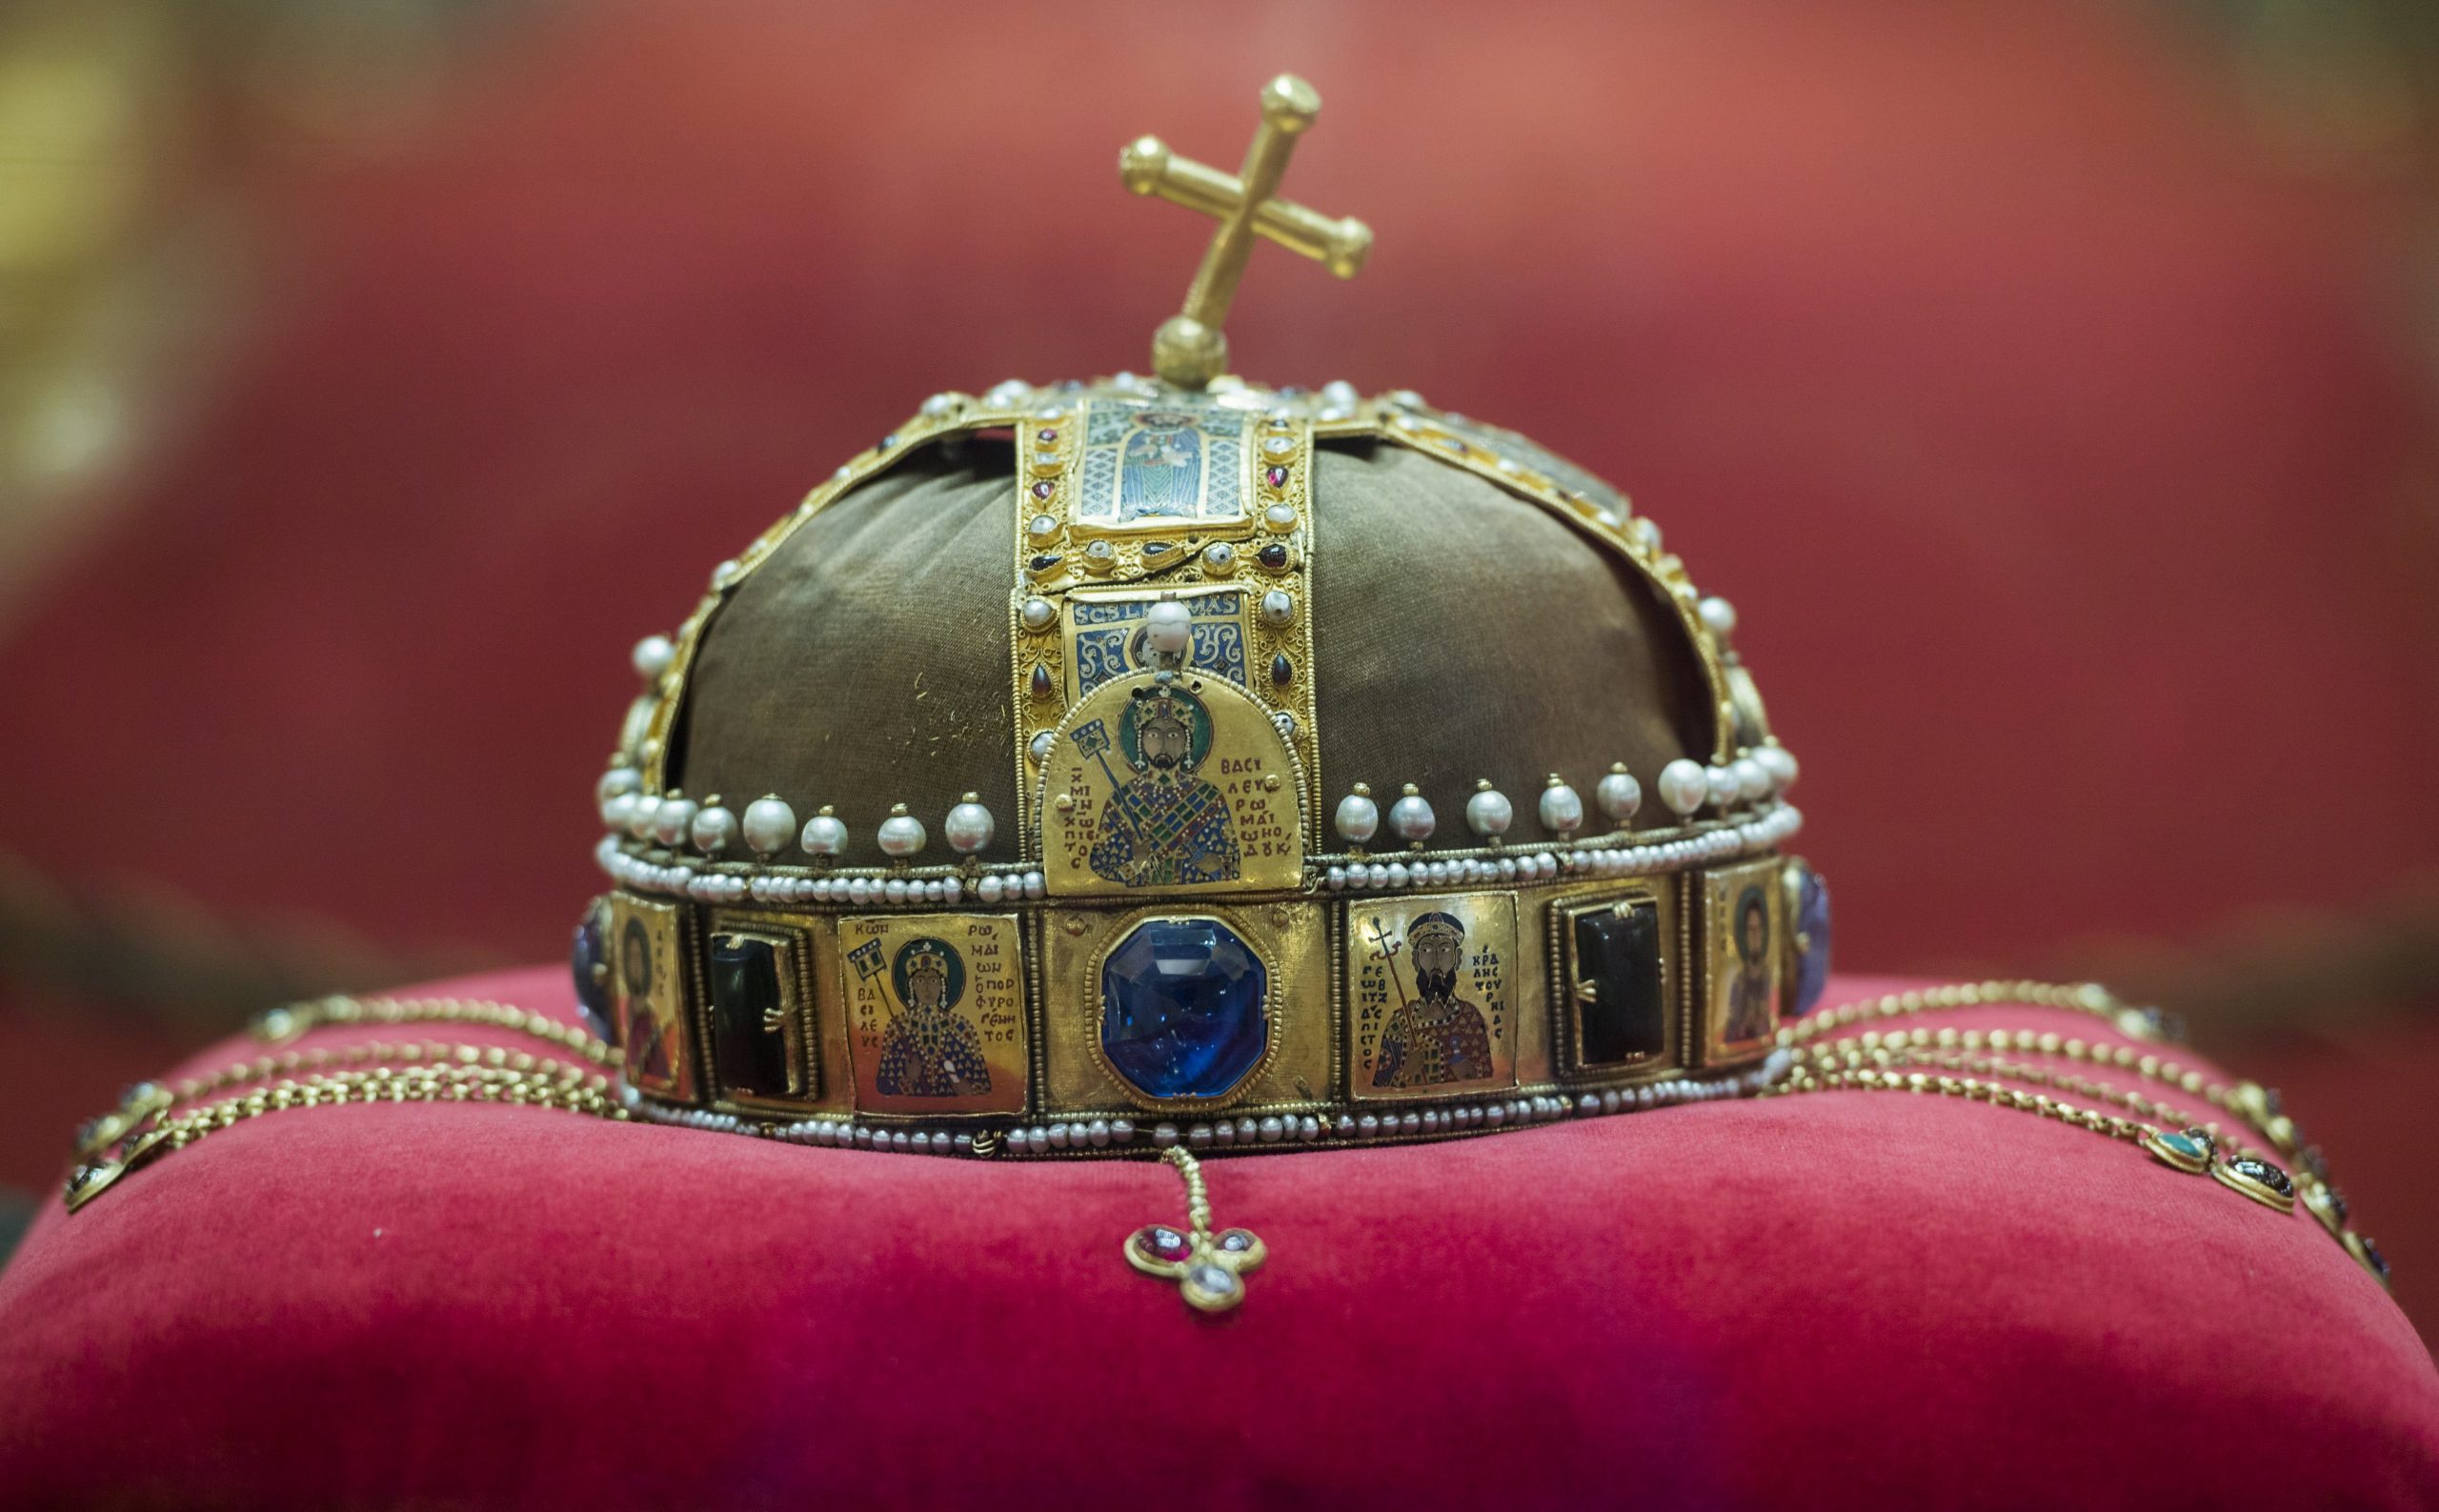 The Return of the Holy Crown from the US to Hungary - Interview with Historian Tibor Glant